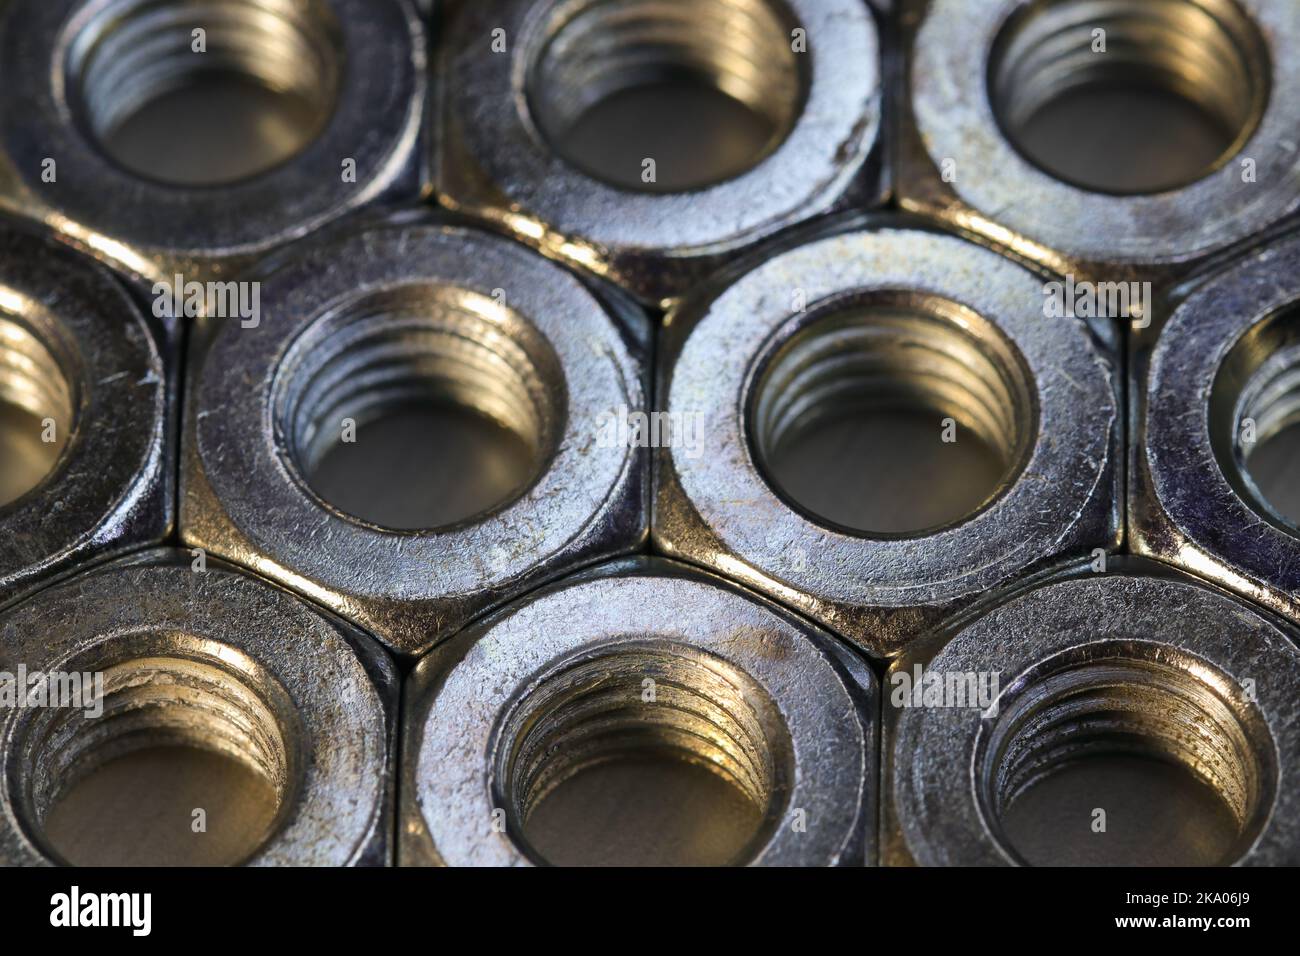 Organized Threaded Metal Hex Nuts On Flat Surface Stock Photo